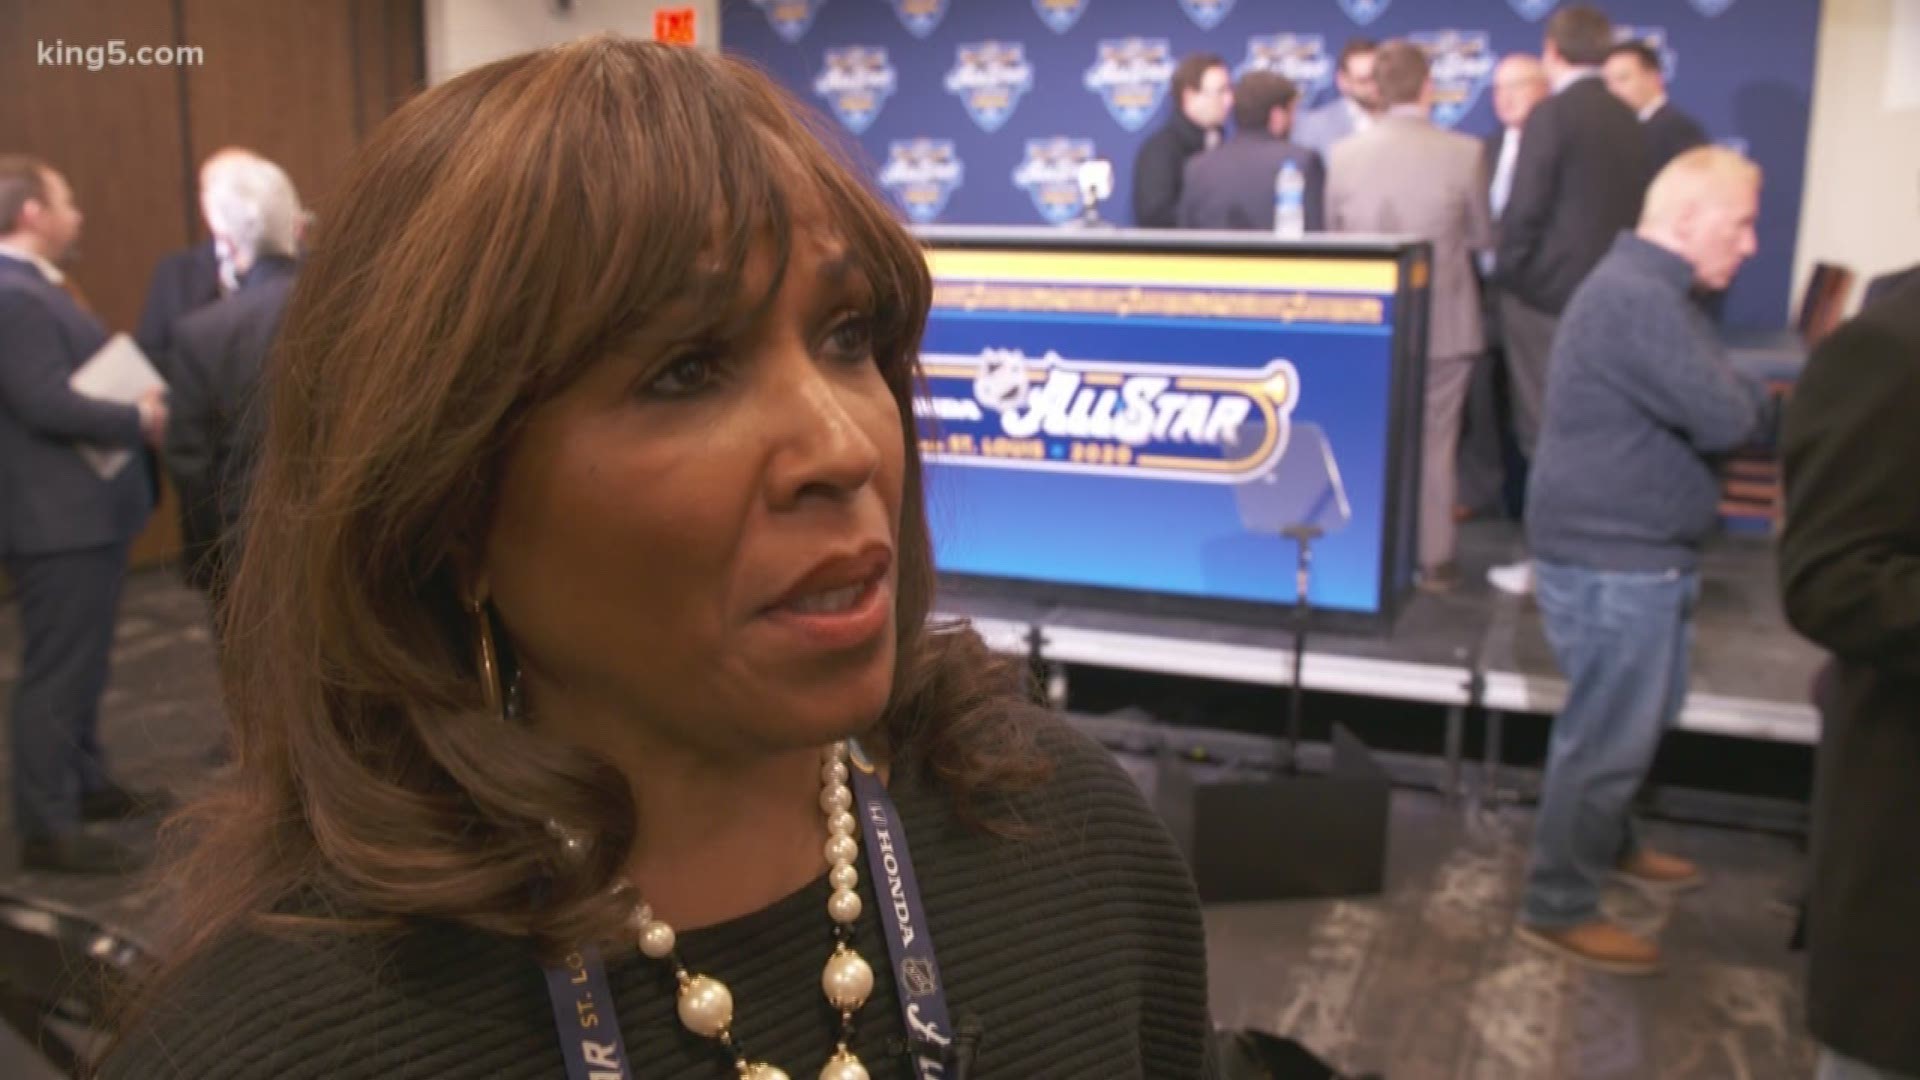 "It's all about leadership," said NHL's Kim Davis. KING 5's Chris Daniels caught up with her at All-Star Weekend.